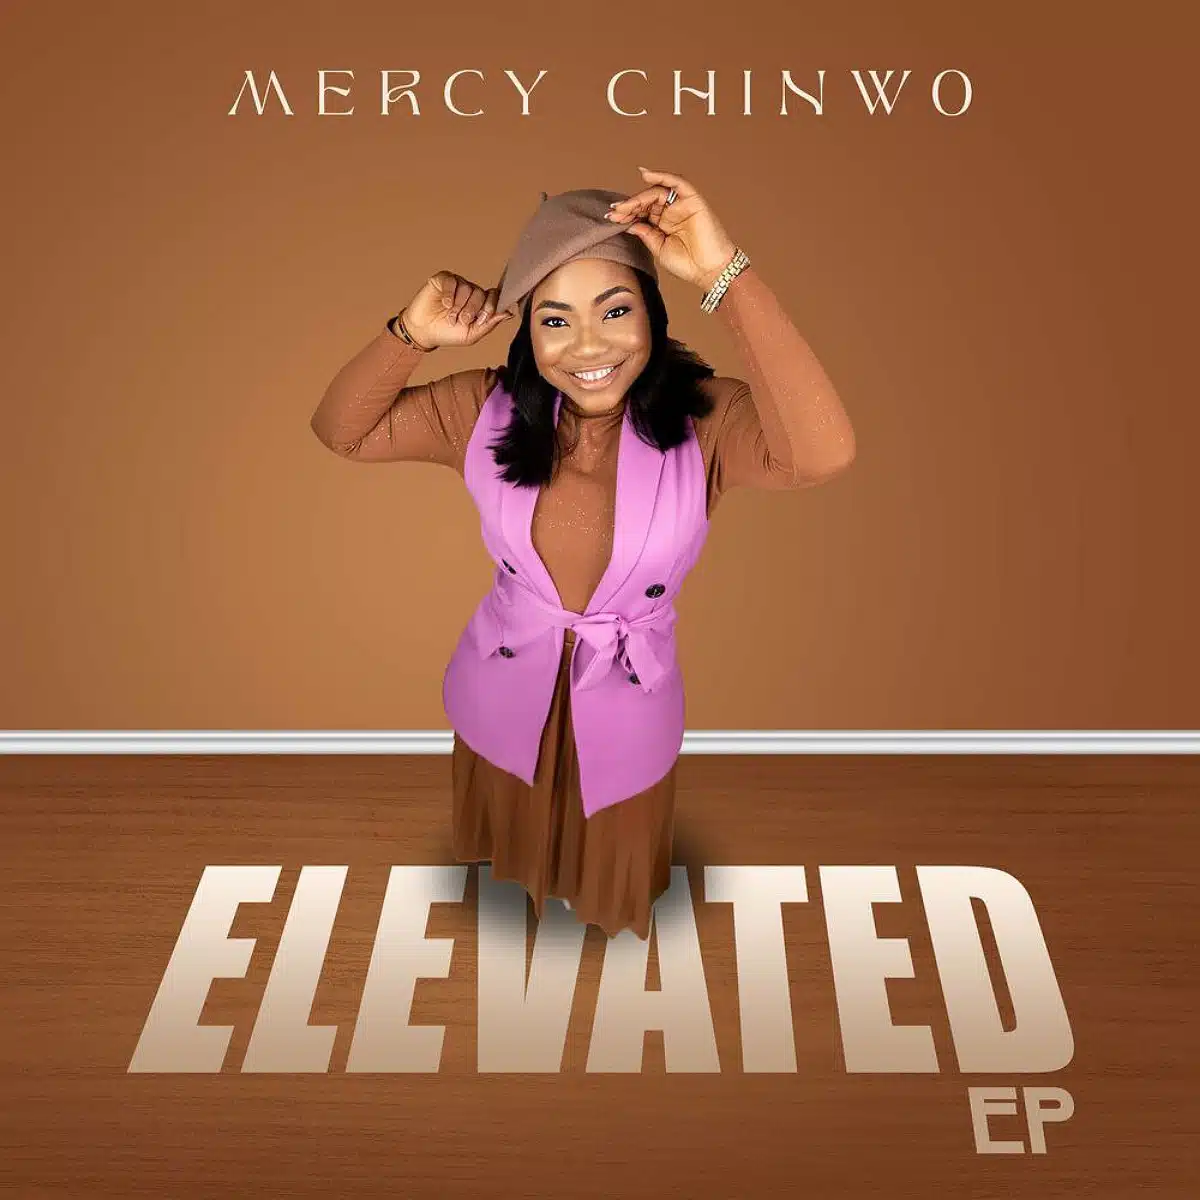 DOWNLOAD: Mercy Chinwo – “Hollow” Mp3